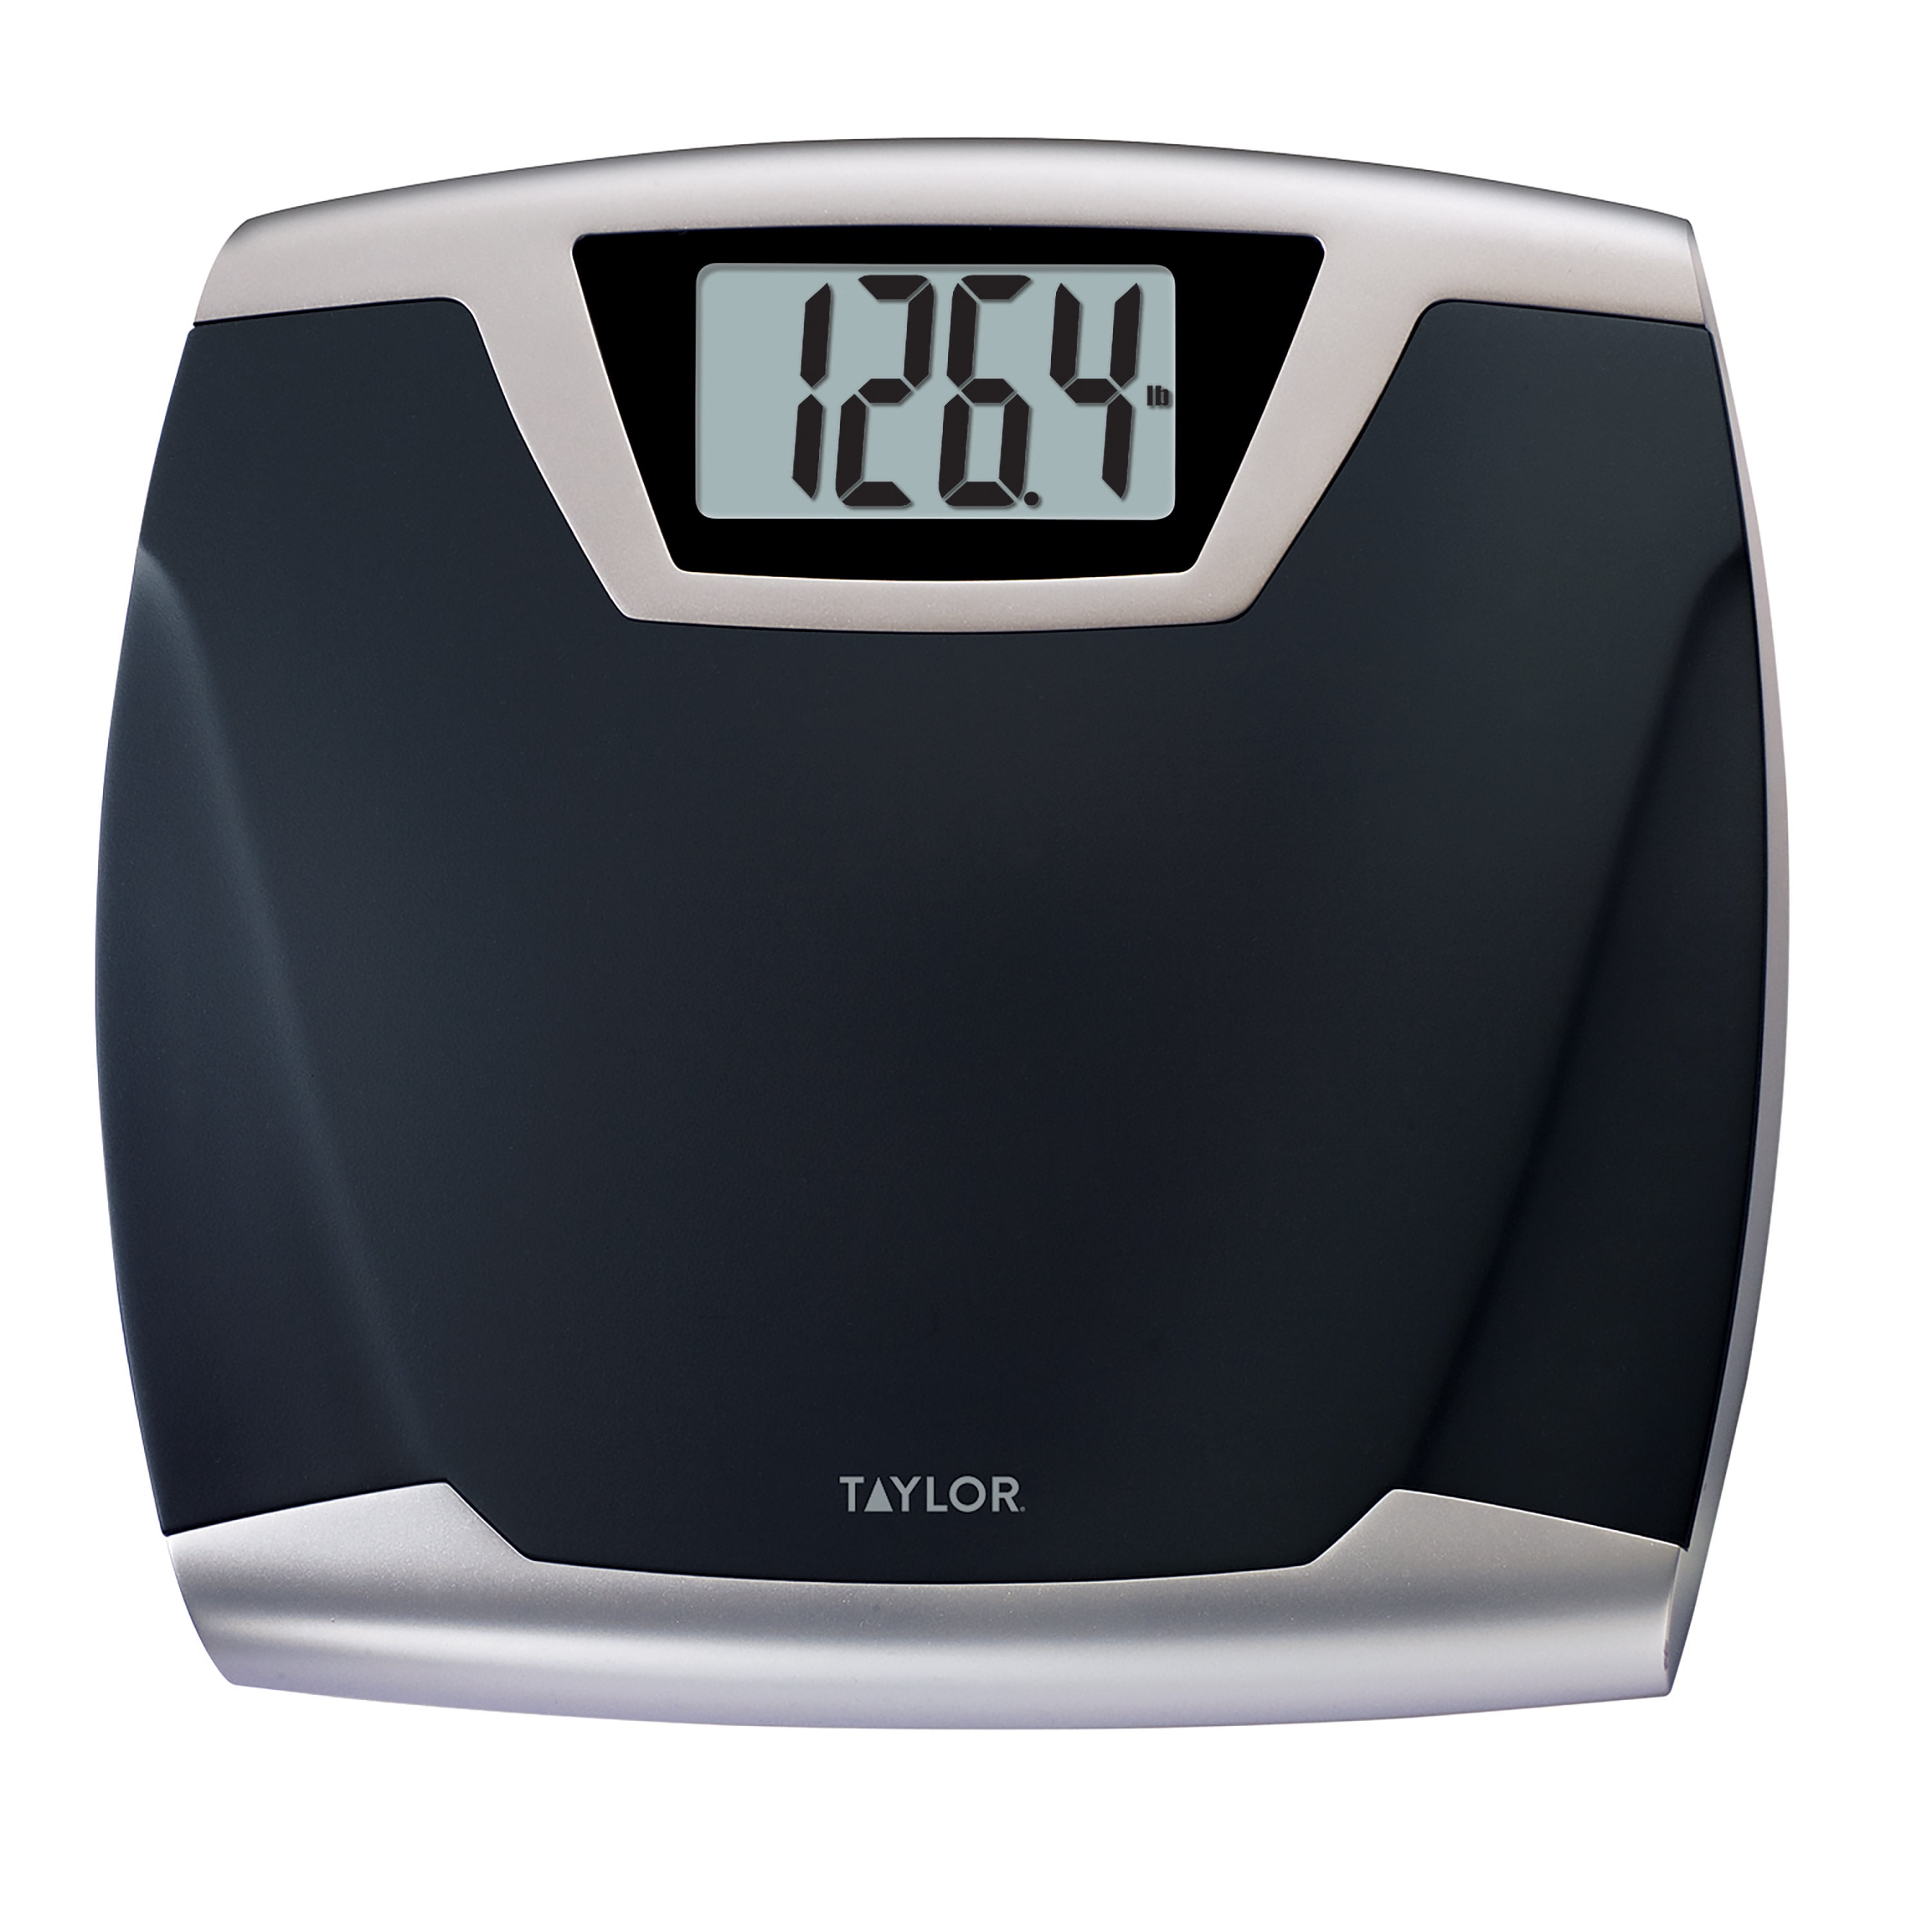 Taylor Digital Bath Scale with Carry Handle and Large Platform 